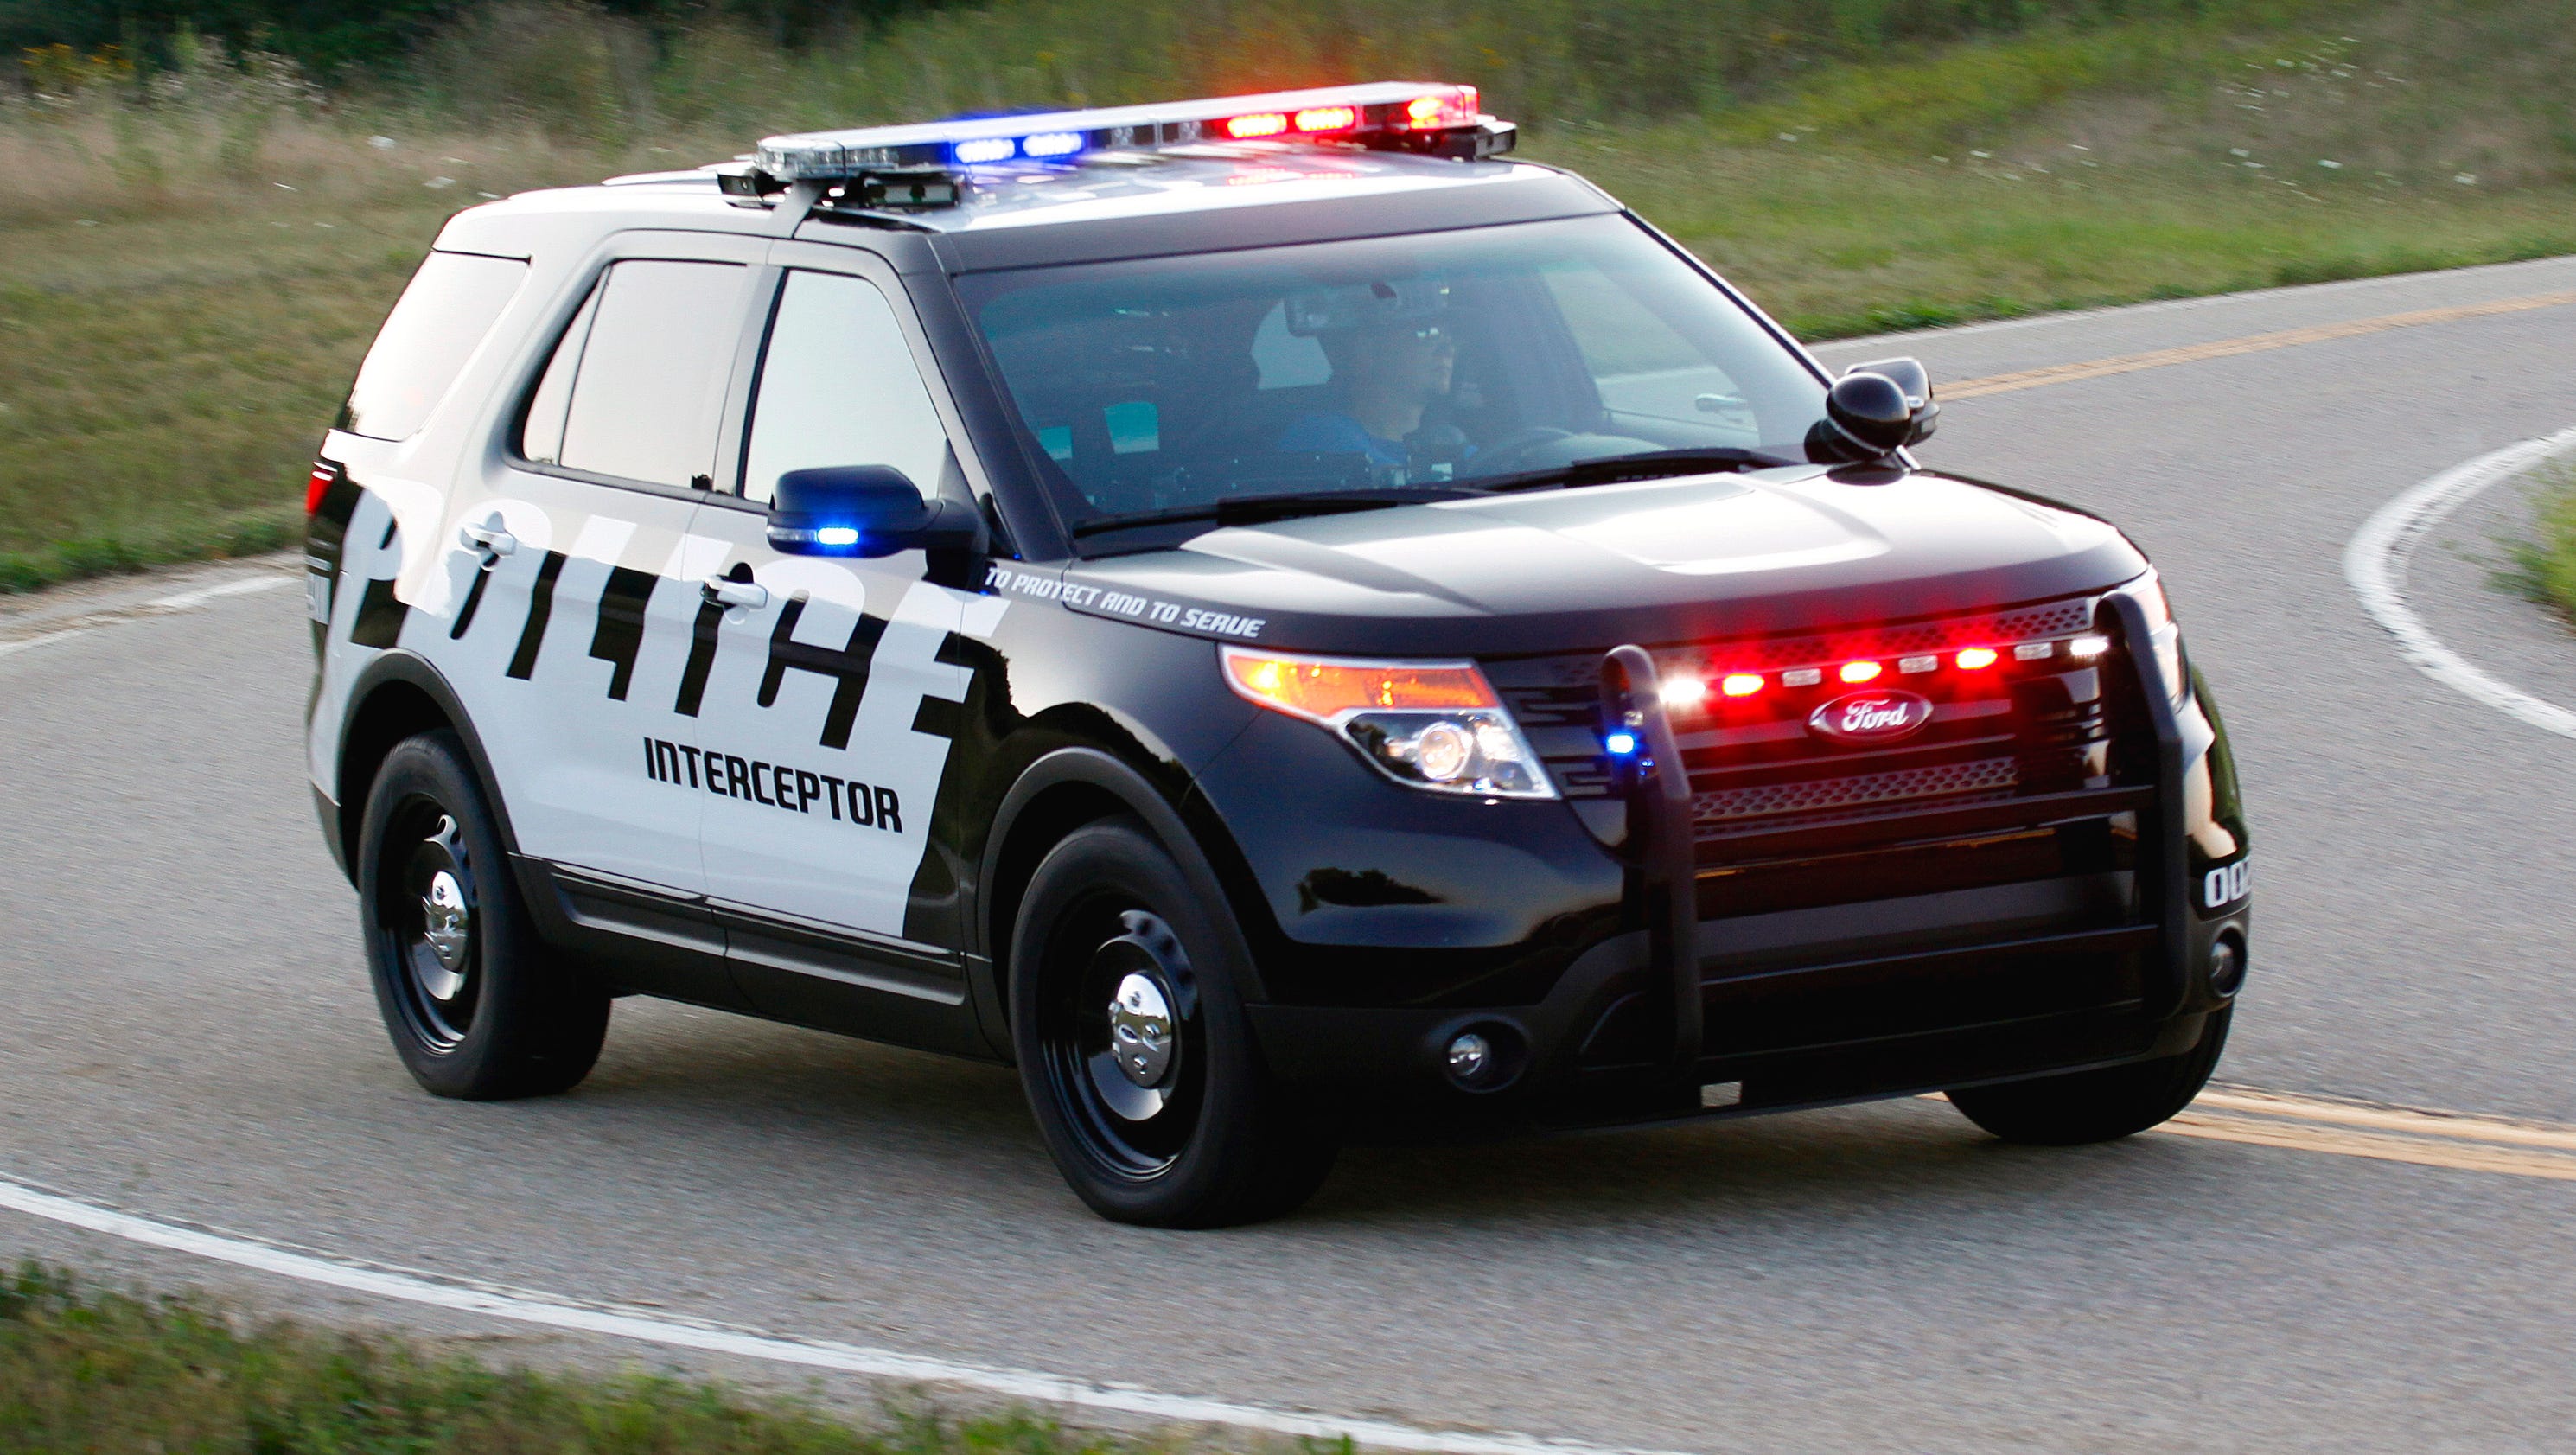 Ford chases down higher police car sales